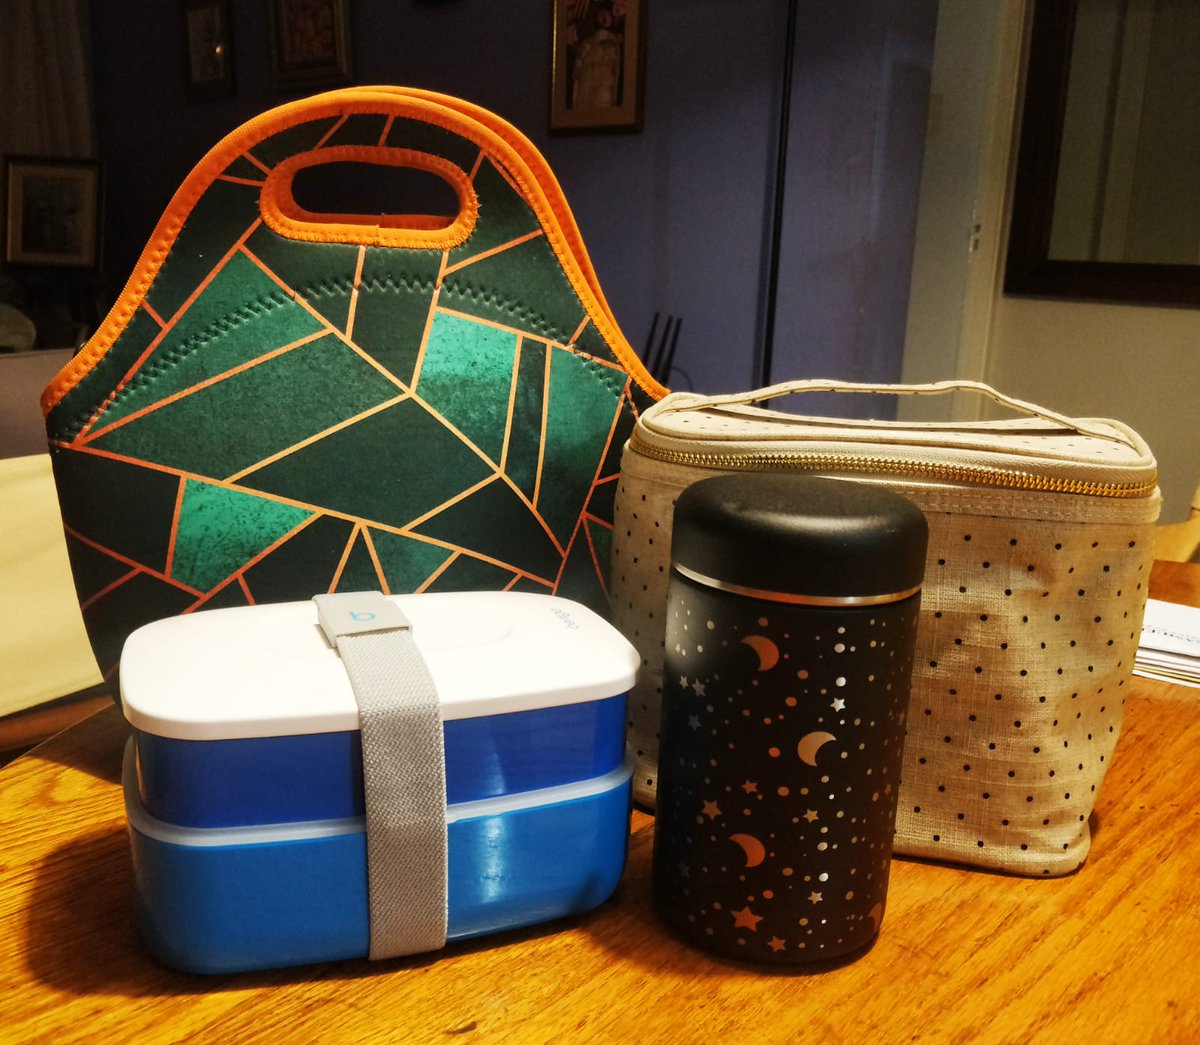 Make Sunday Monday and food storage easier and cuter: Cheap Way: Reuse takeout containers & glass jars where you can. Bougie Way: Get an adorable bento box, lunch bag, and spice jars:  https://amzn.to/3vi7xgN  &  https://amzn.to/3avpQao 